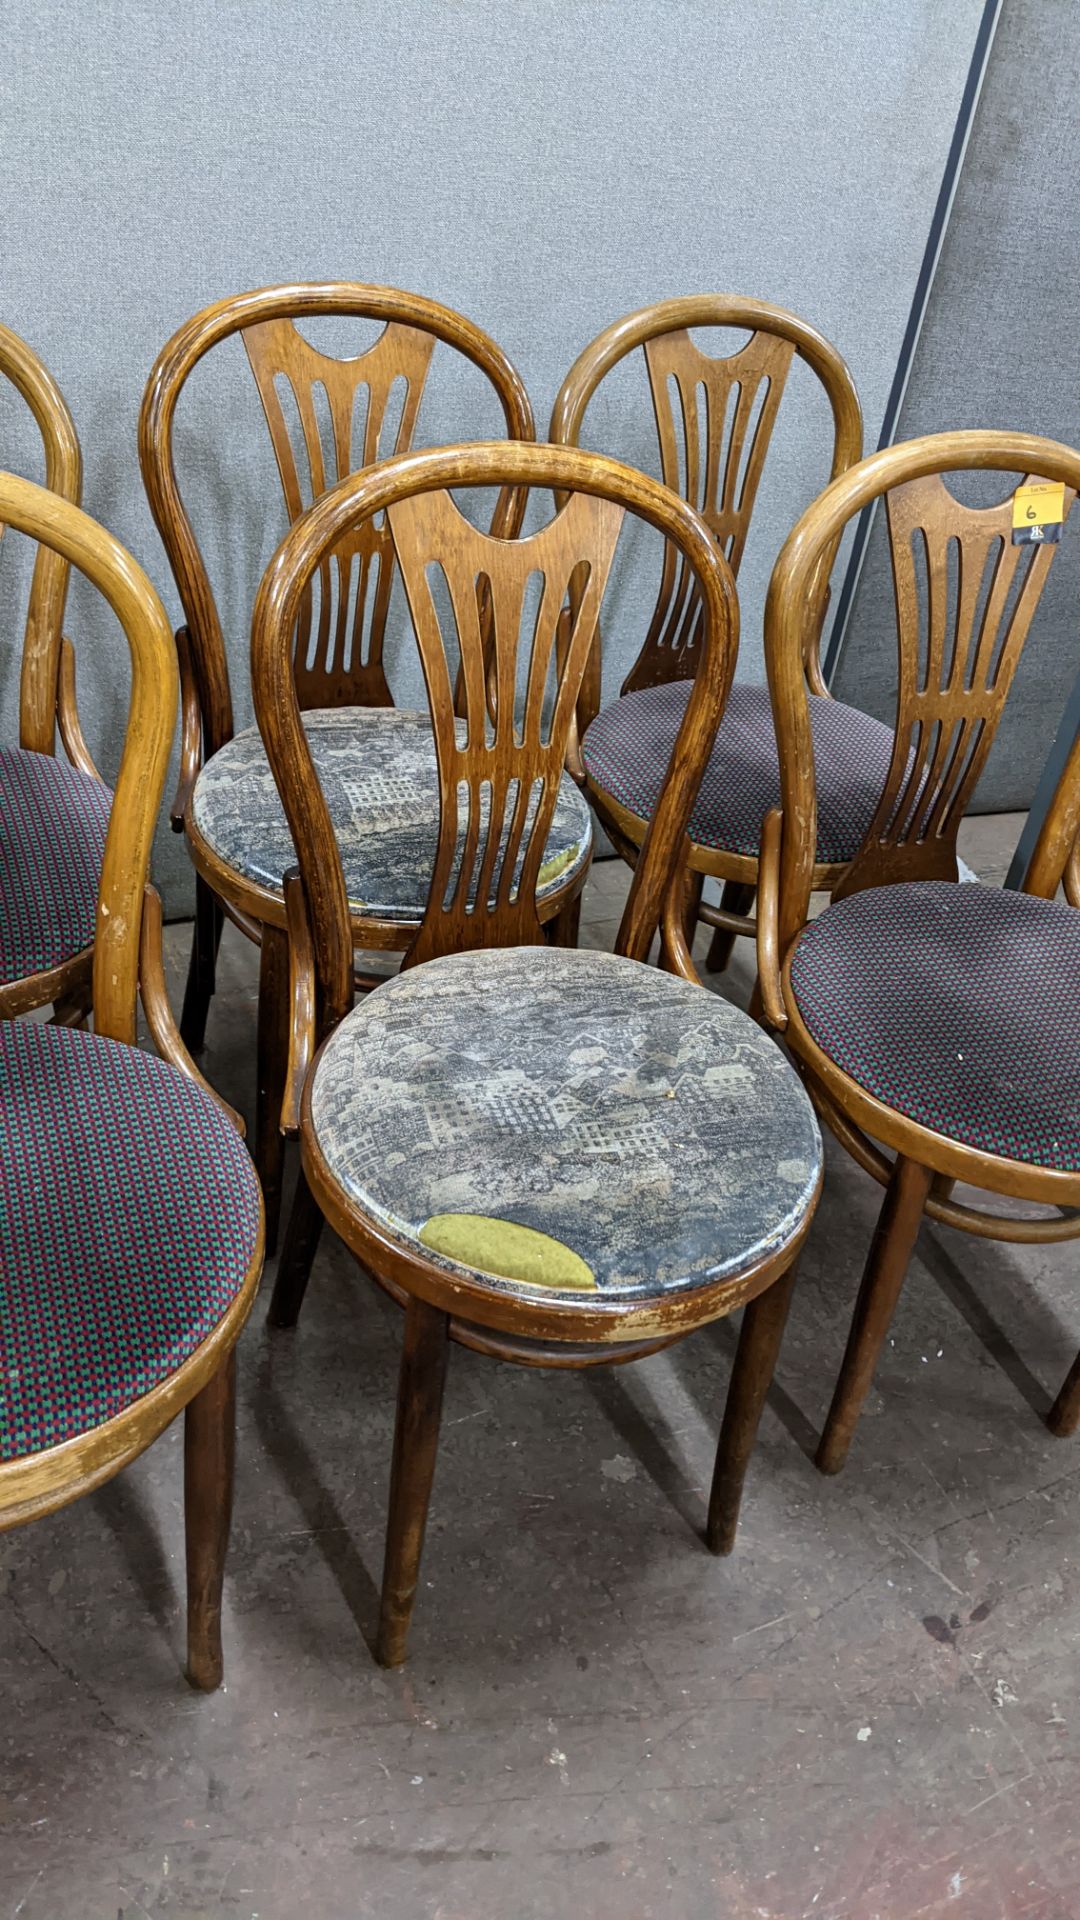 6 off upholstered wooden dining chairs - Image 4 of 6